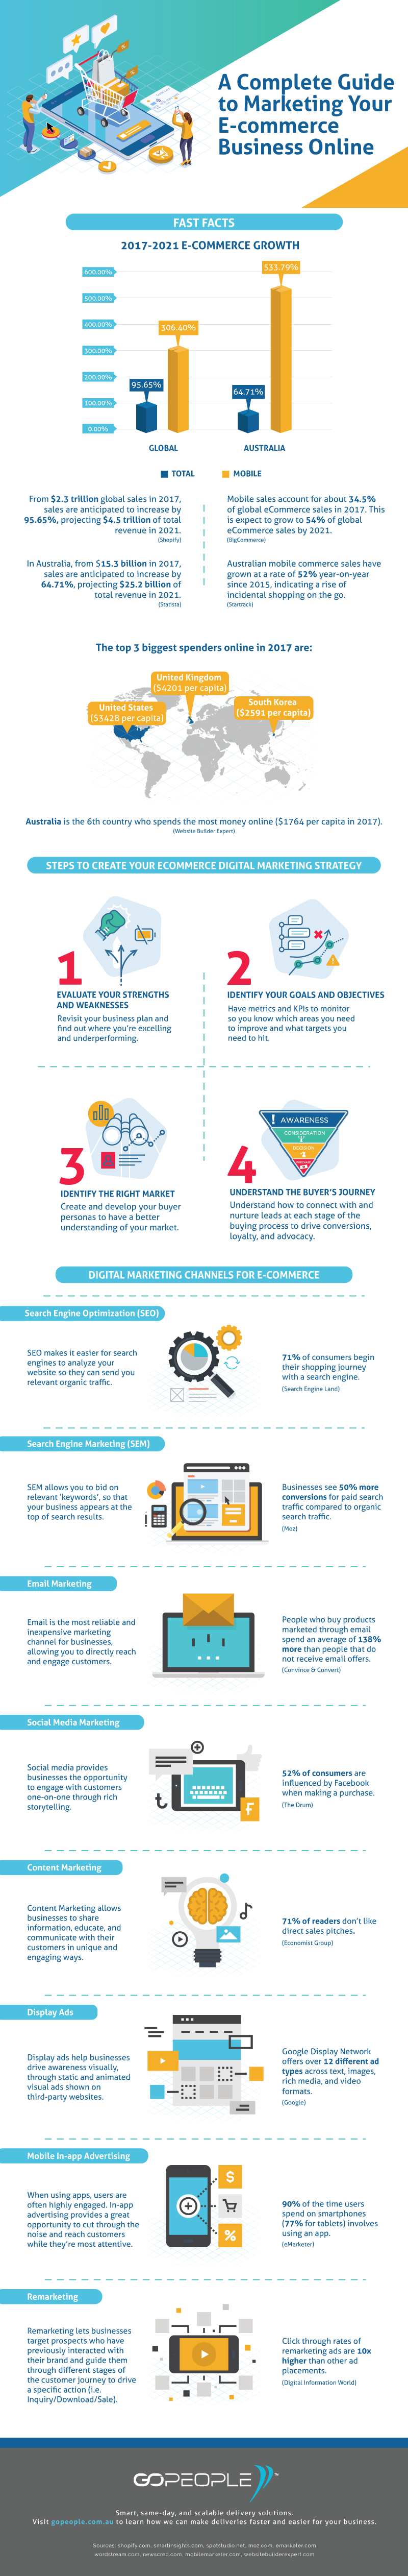 Complete-Guide-to-Marketing-Your-Ecommerce-Business-Online-Infographic